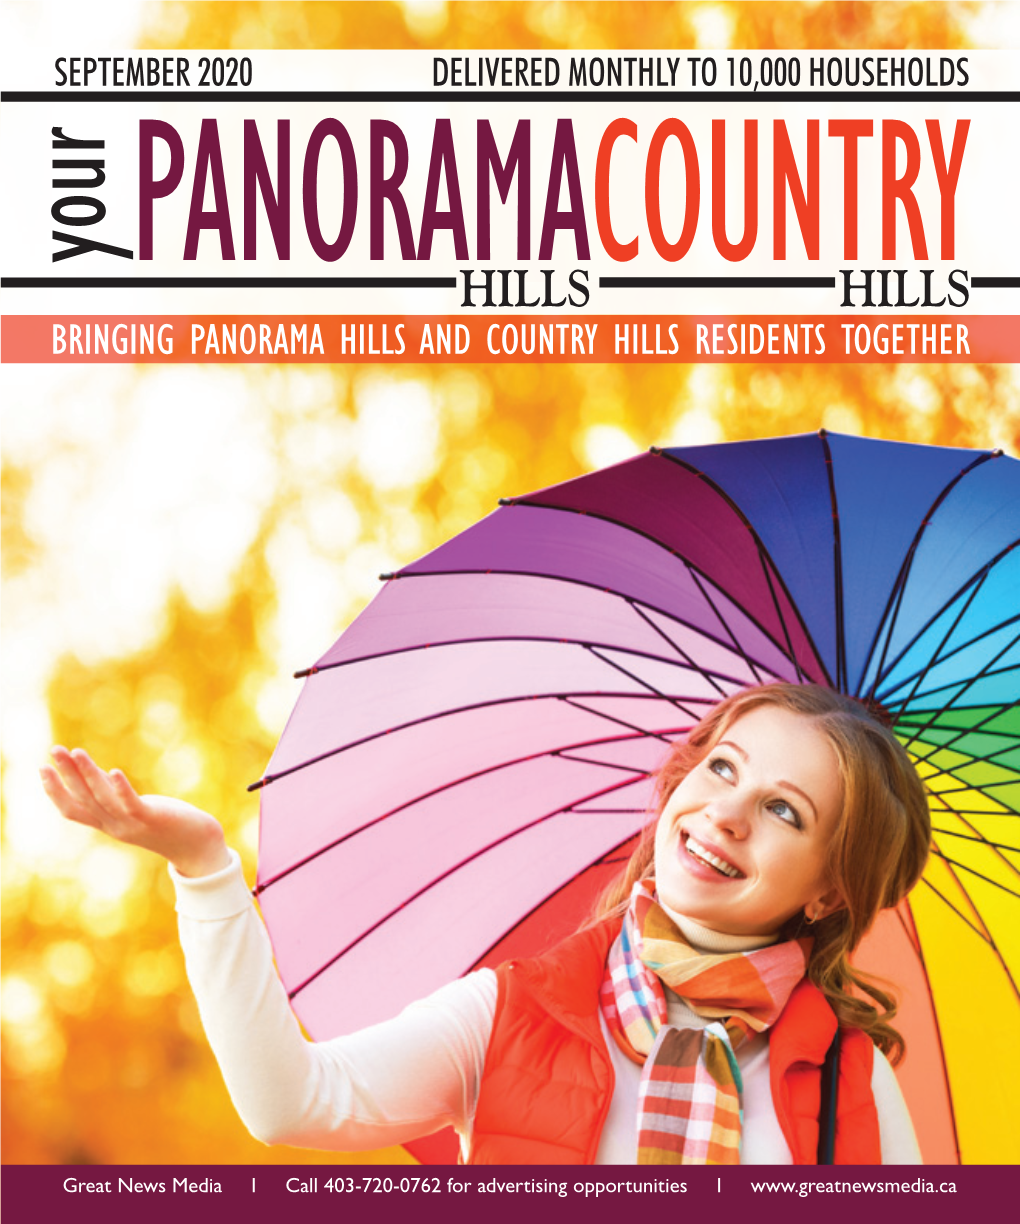 Hills Hills Bringing Panorama Hills and Country Hills Residents Together